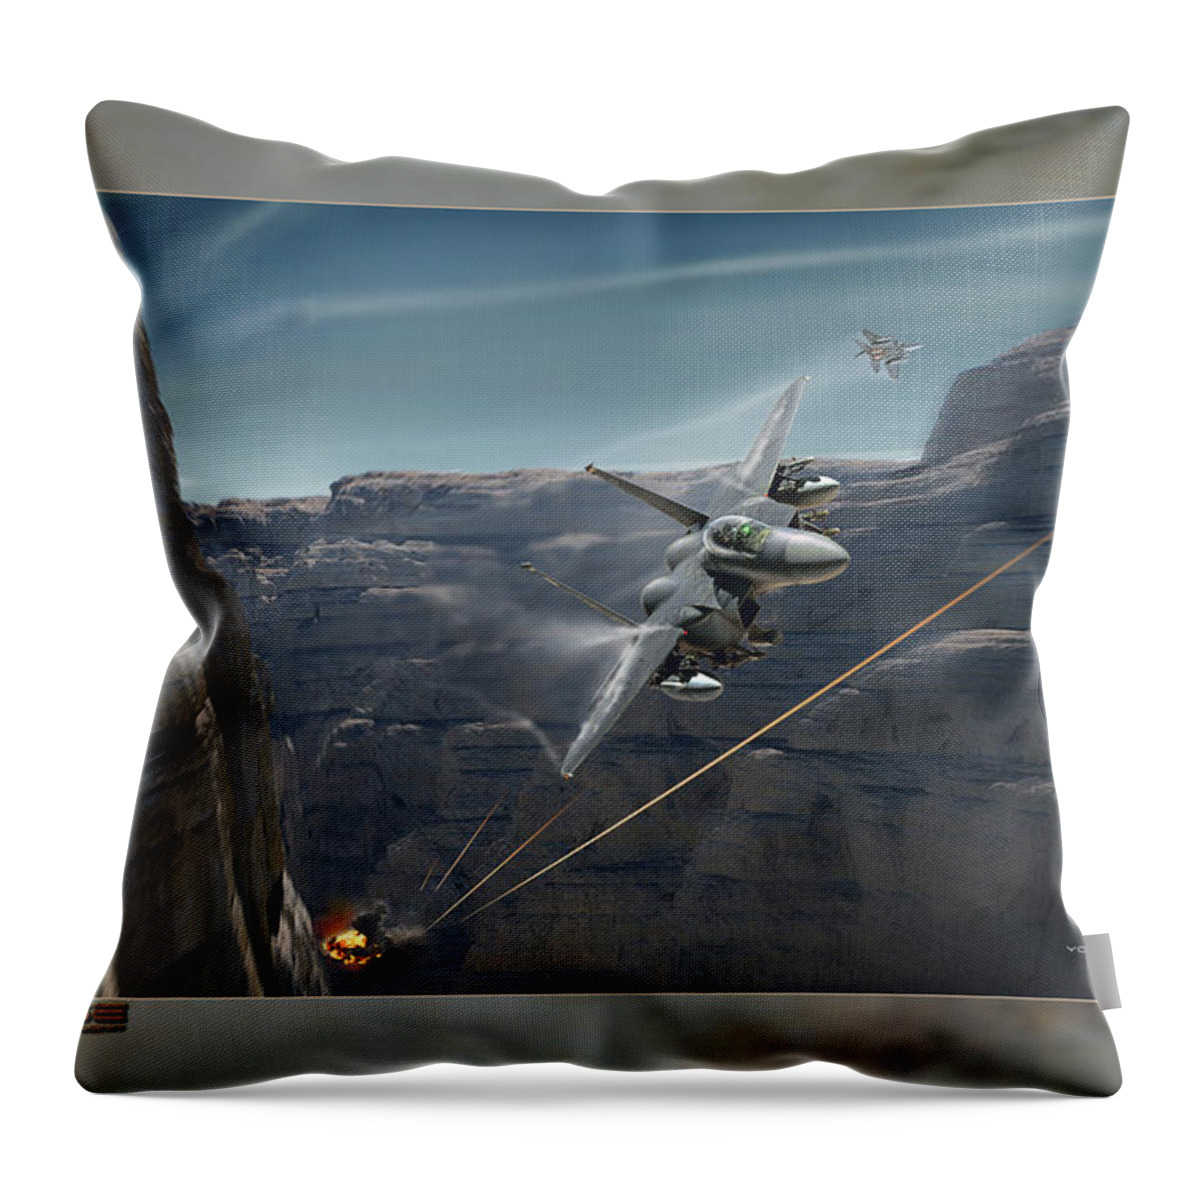 War Throw Pillow featuring the digital art You Can Run But You Cant Hide by Peter Van Stigt